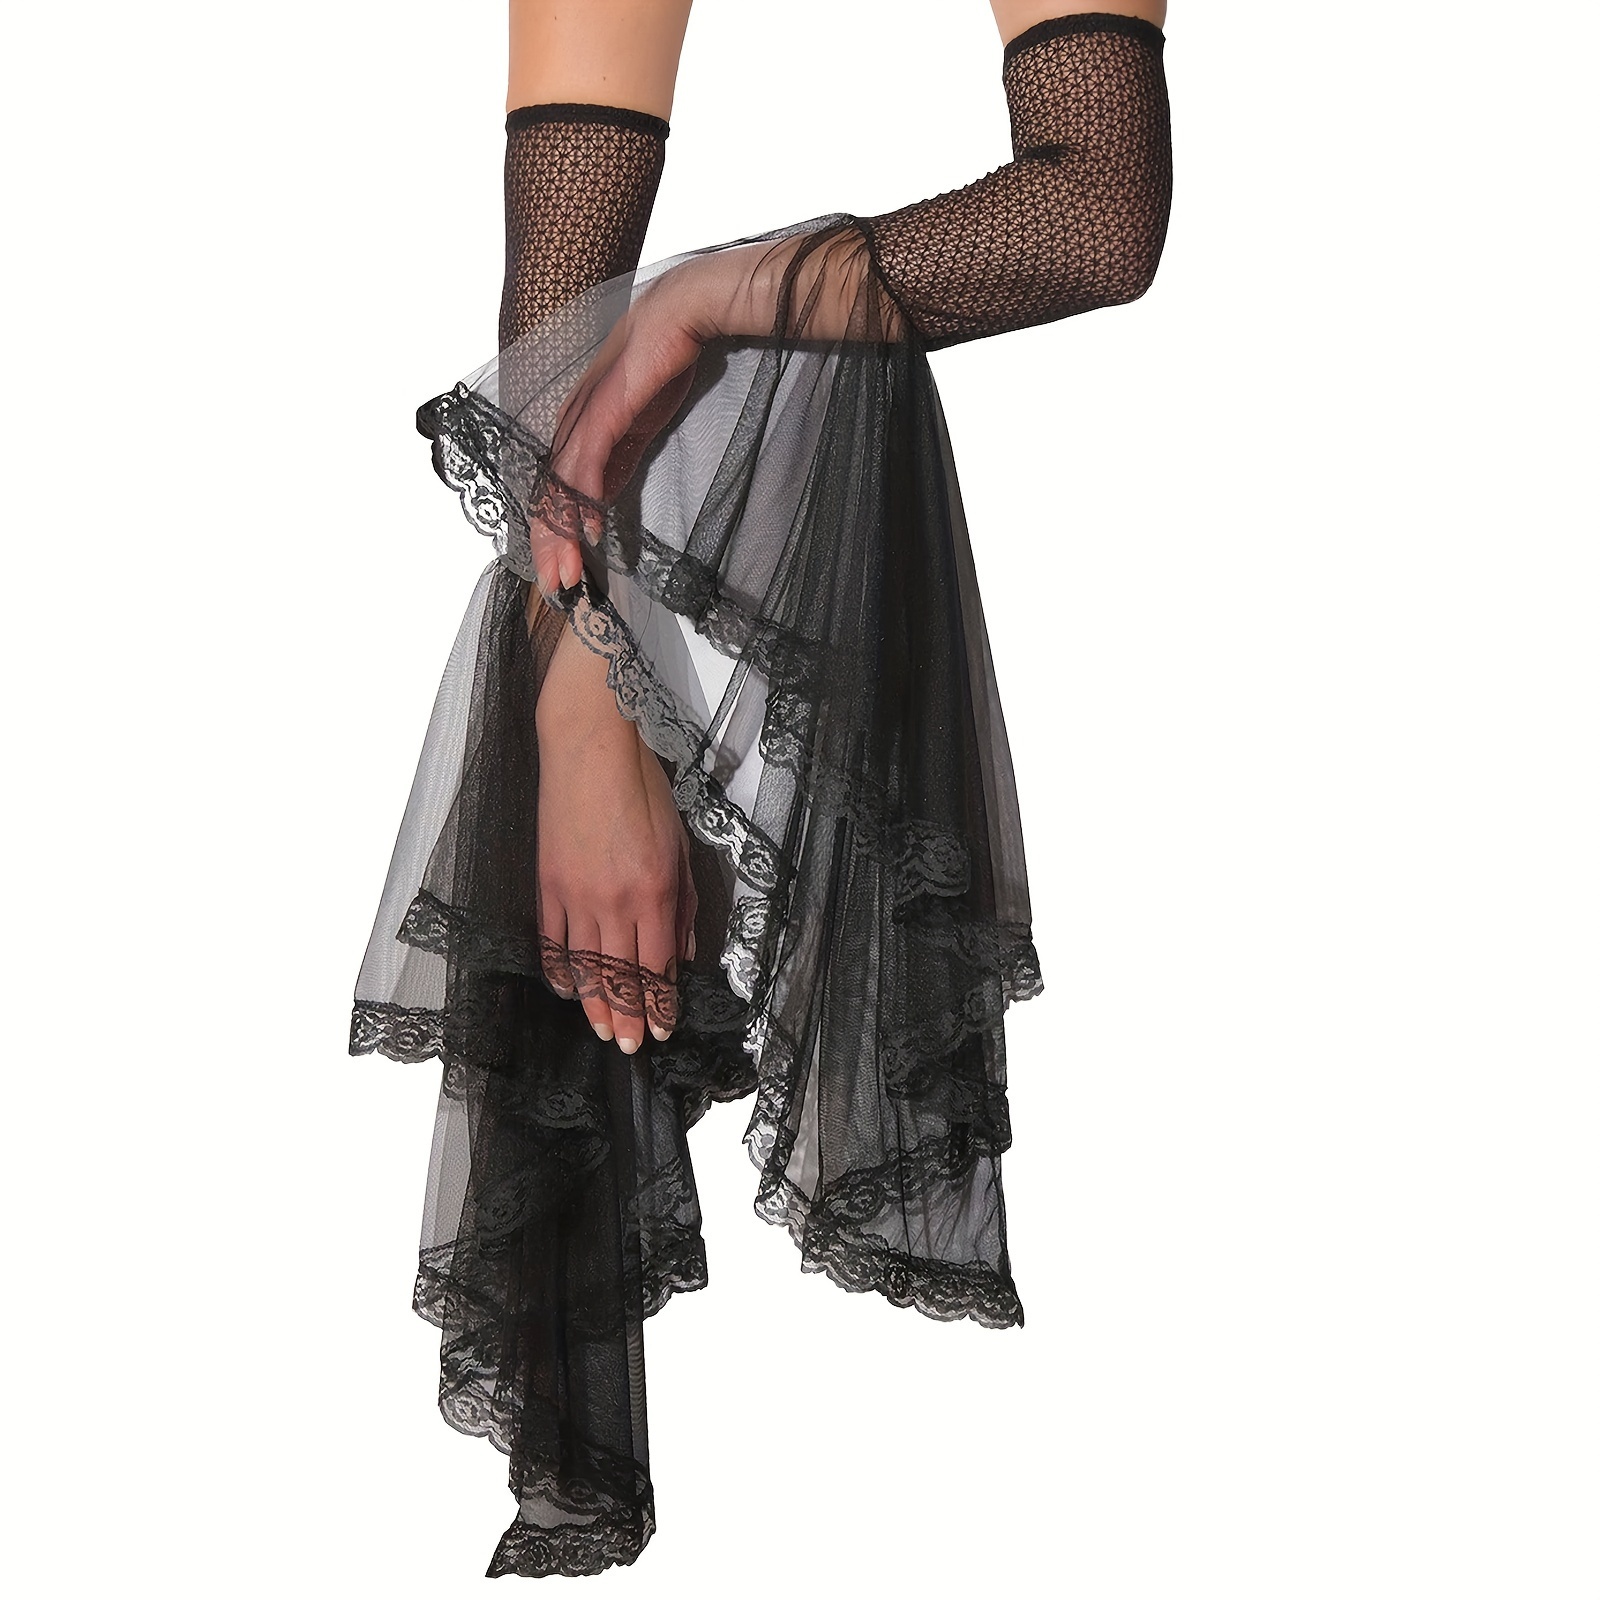 

Women's Gothic 1 Pair Black Grim Detachable Arm Sleeves Costume Long Lace Cuff Halloween Witch Accessory